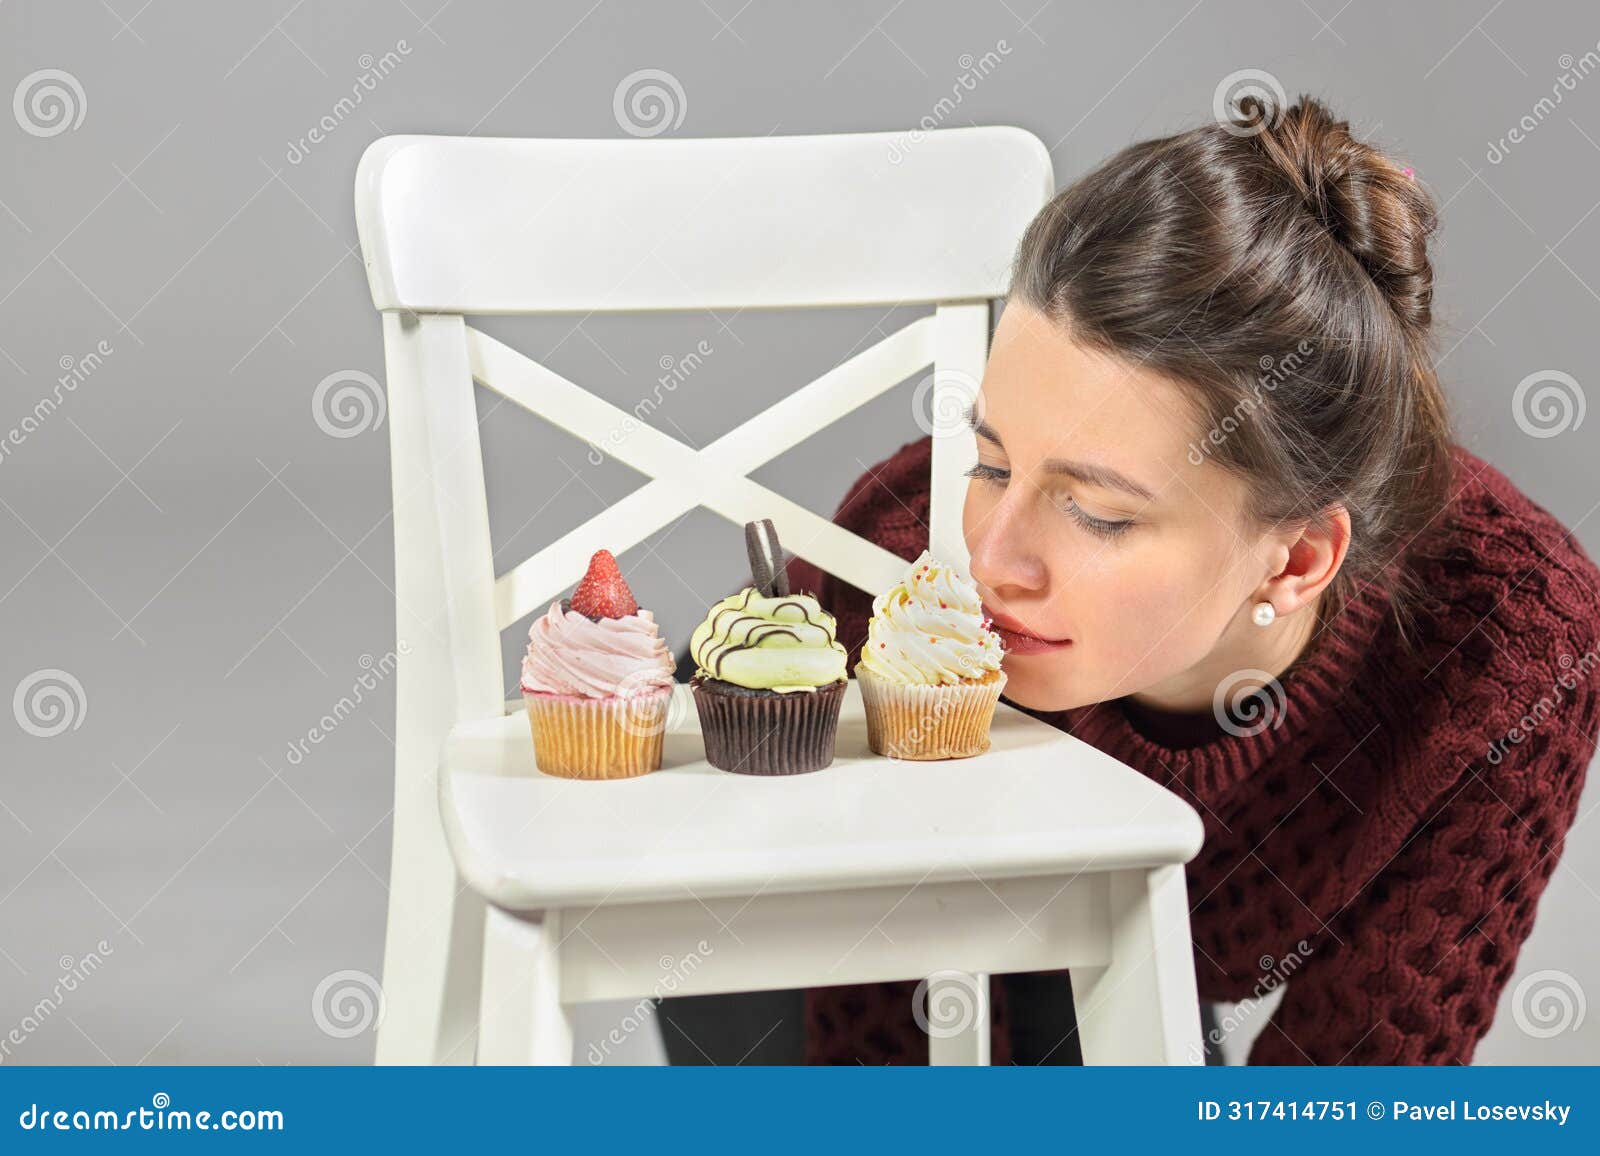 three cakes stand on white chair, young girl bent